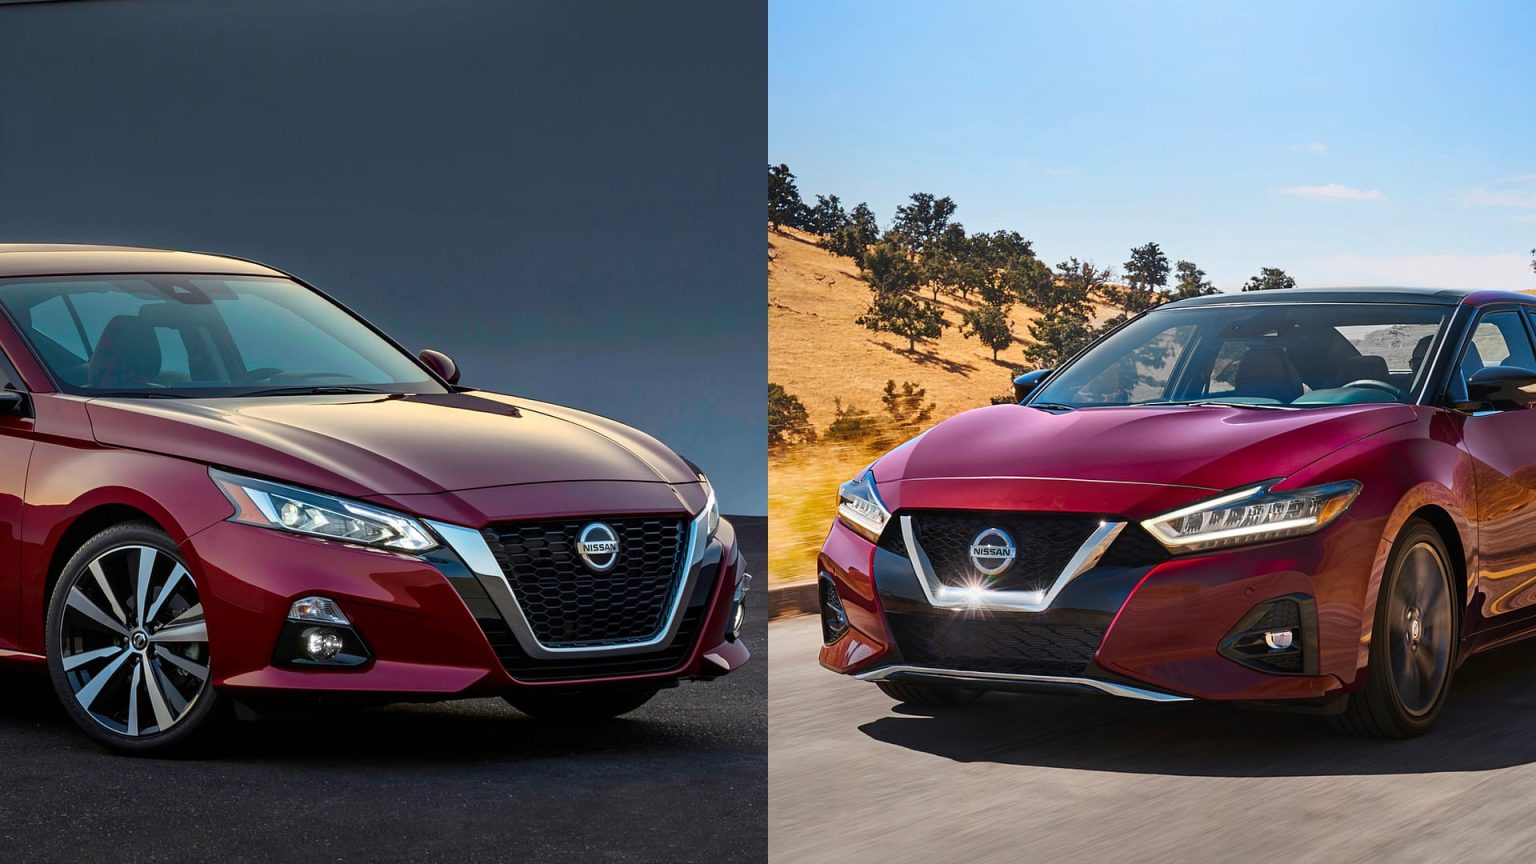 Nissan Altima vs Maxima Is The Price Difference Justified? Motorborne